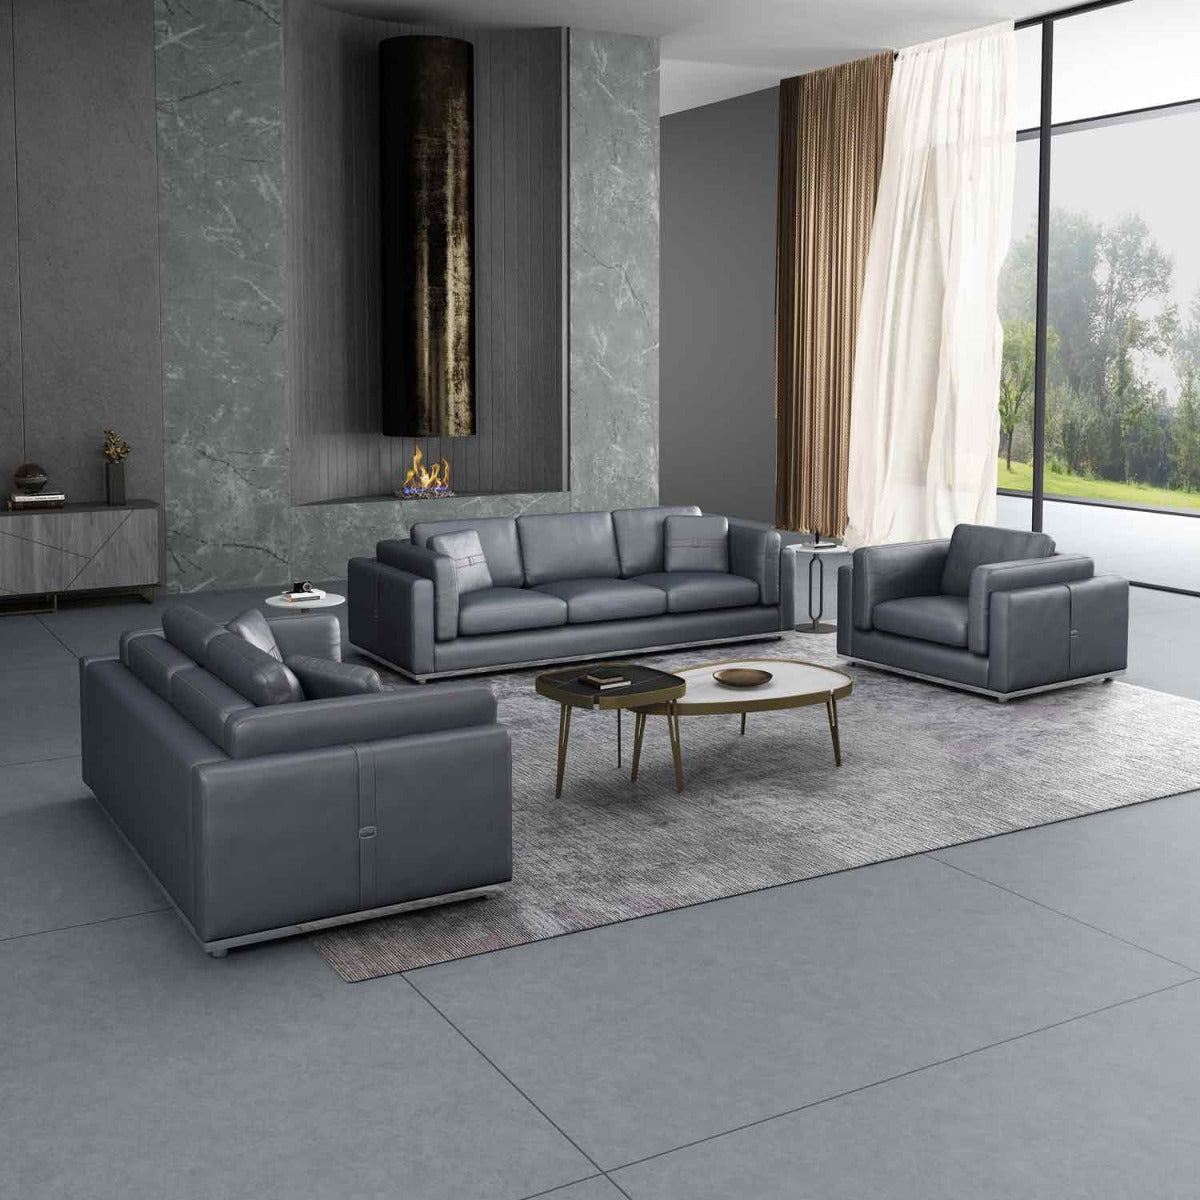 European Furniture - Picasso Sofa in Smokey Gray - 25550-S - New Star Living